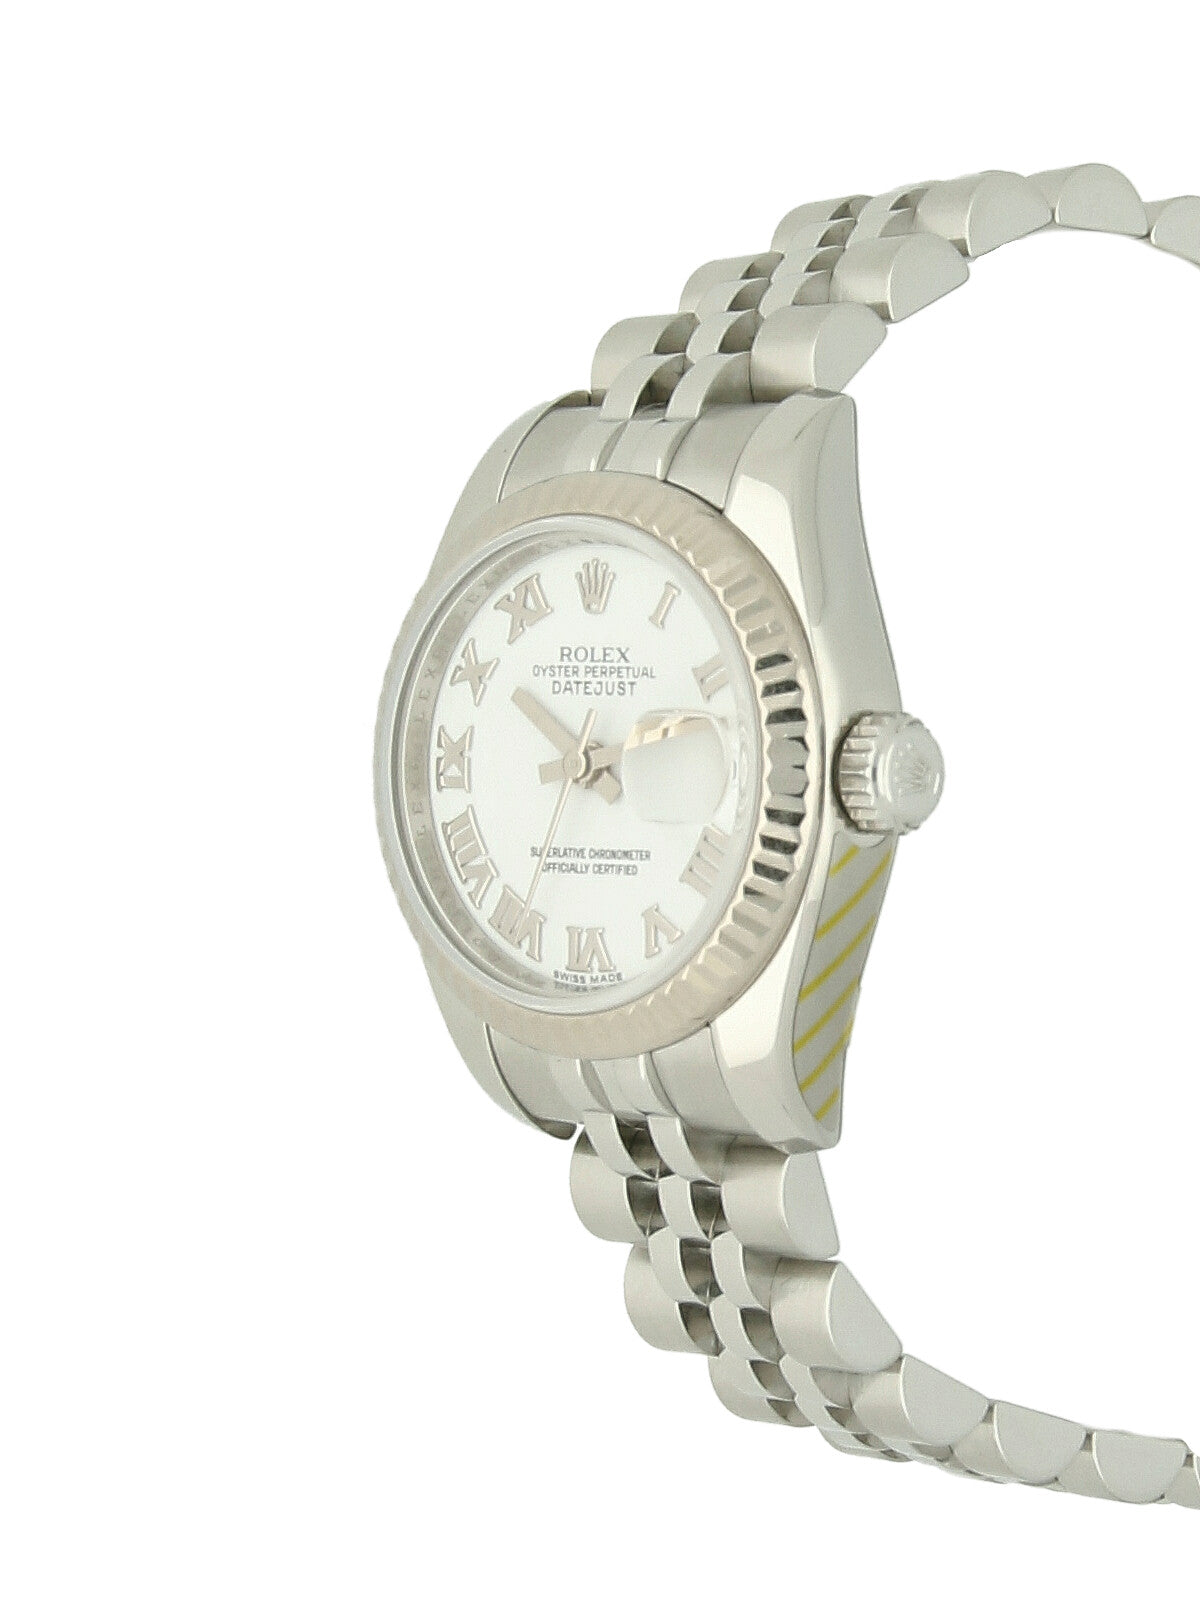 Pre Owned Rolex Lady Datejust Steel & 18ct White Gold Automatic 26mm Watch on Jubilee Bracelet